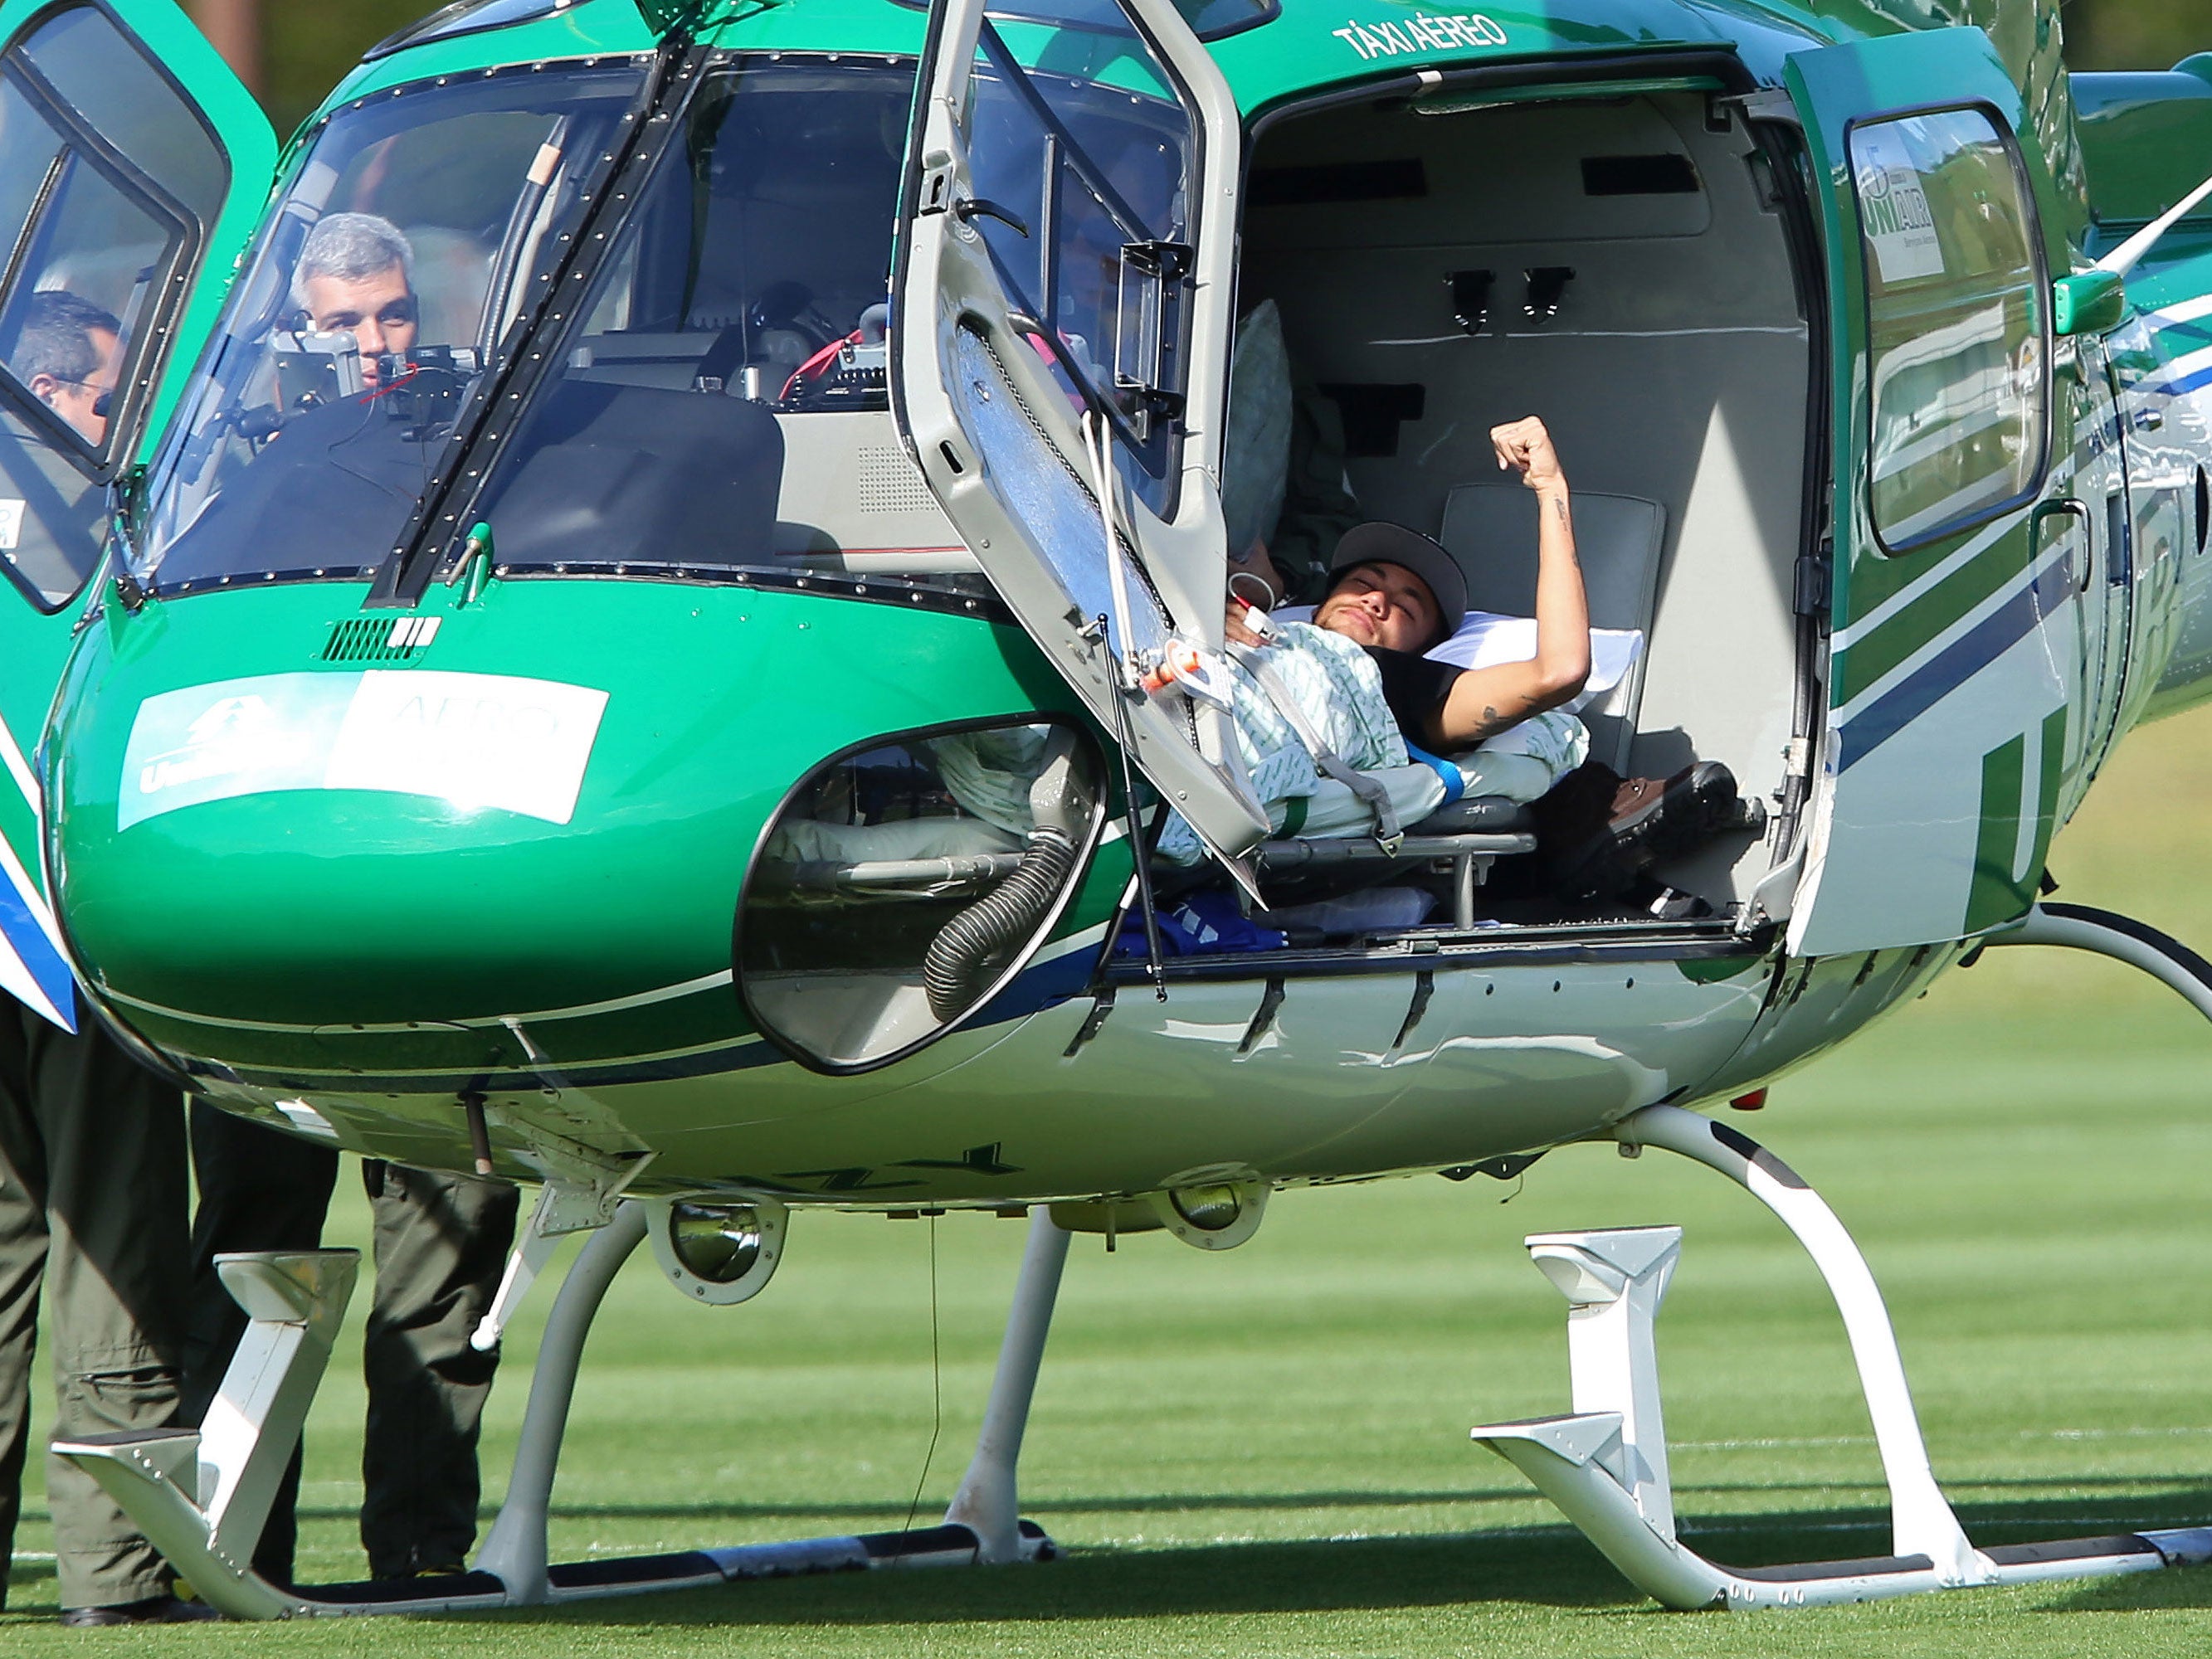 Brazil's Neymar is seen inside a medical helicopter at the Granja Comary training center in Teresopolis, Brazil. Neymar will be treated at home for his back injury.